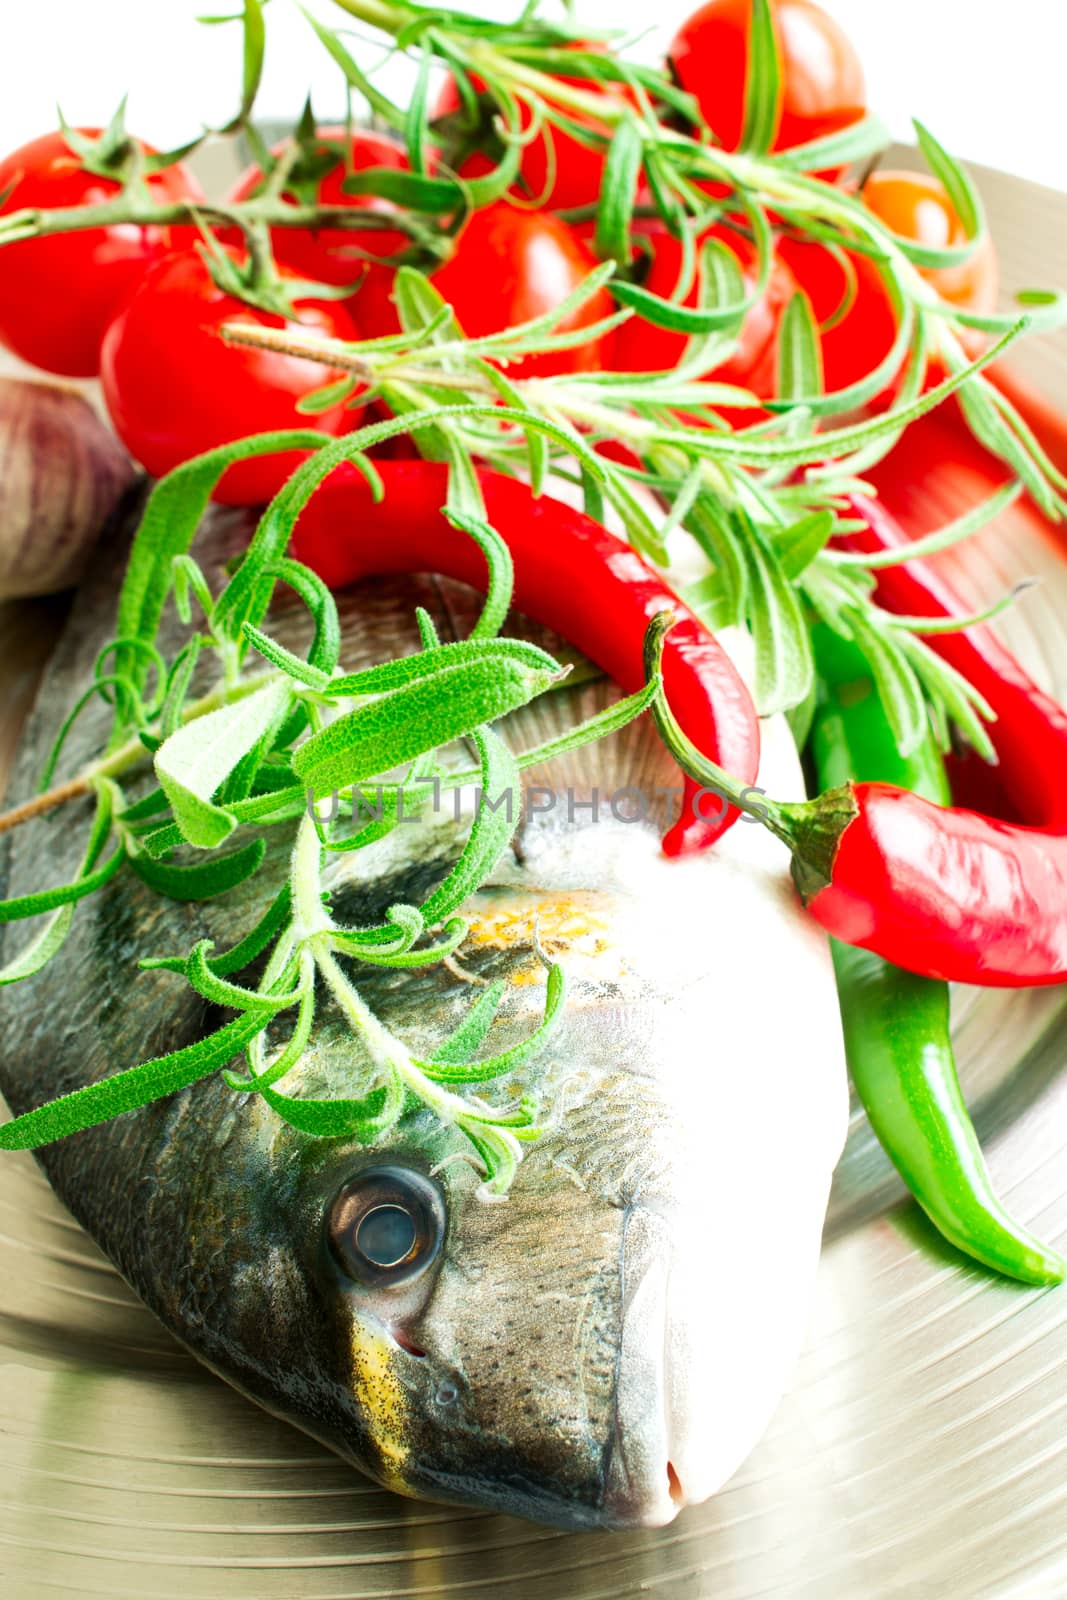 Fresh raw Dorada fish with fresh rosemary herb, garlic, chili peppers and cherry tomatoes on a metal plate